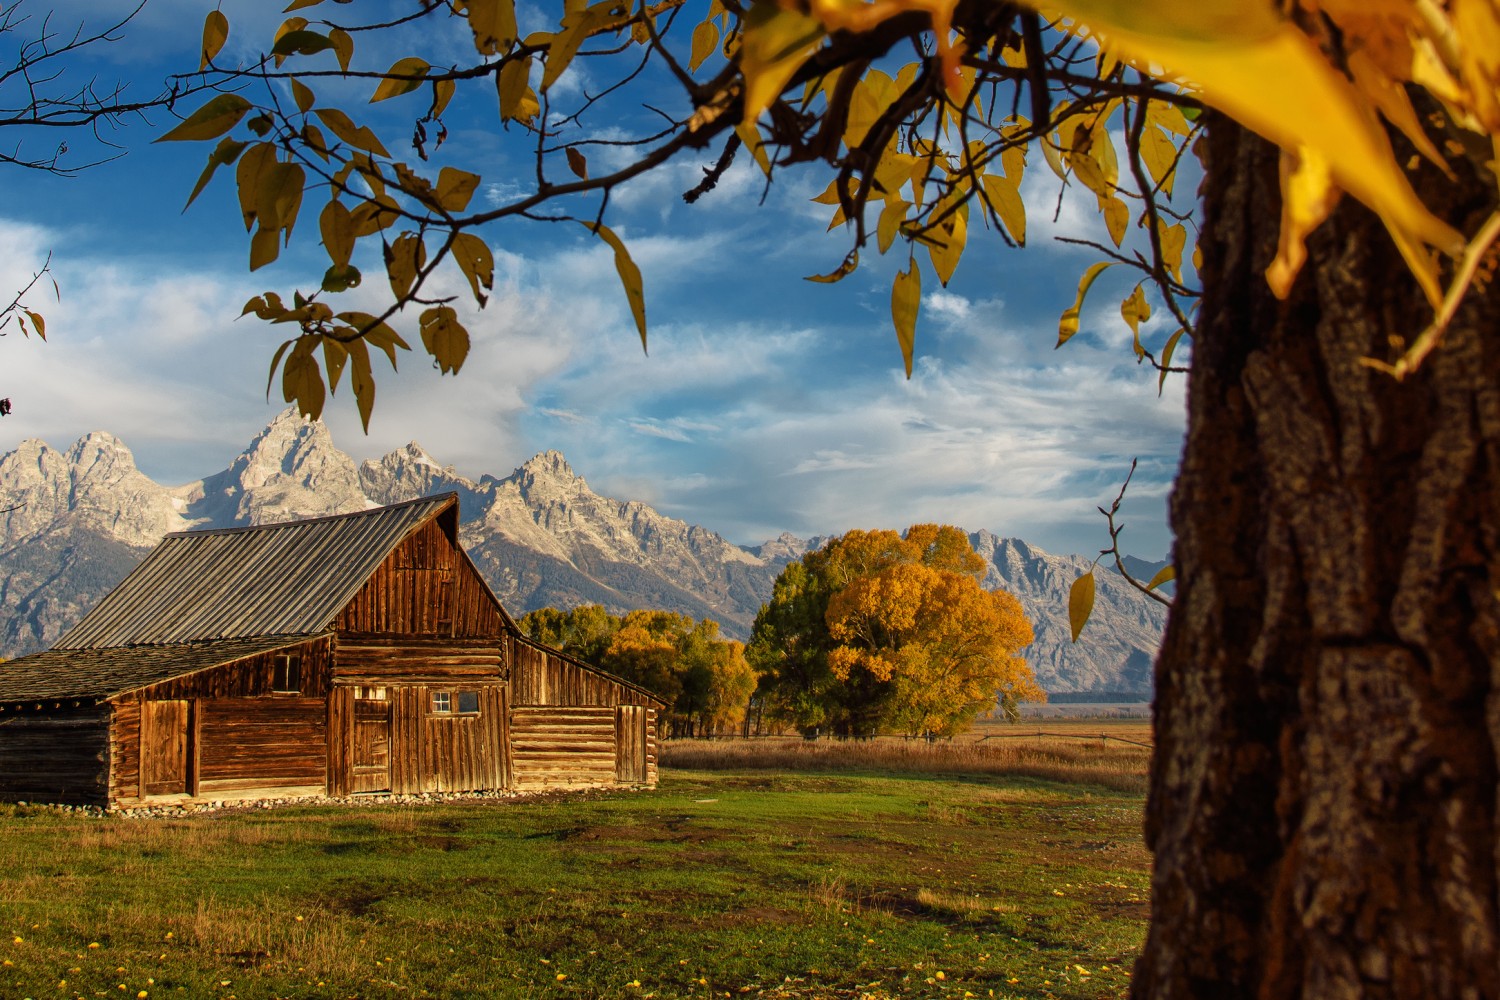 500px Road Trip Photo Diary Days 8-12: Yellowstone National Park, Grand Tetons & Bisons